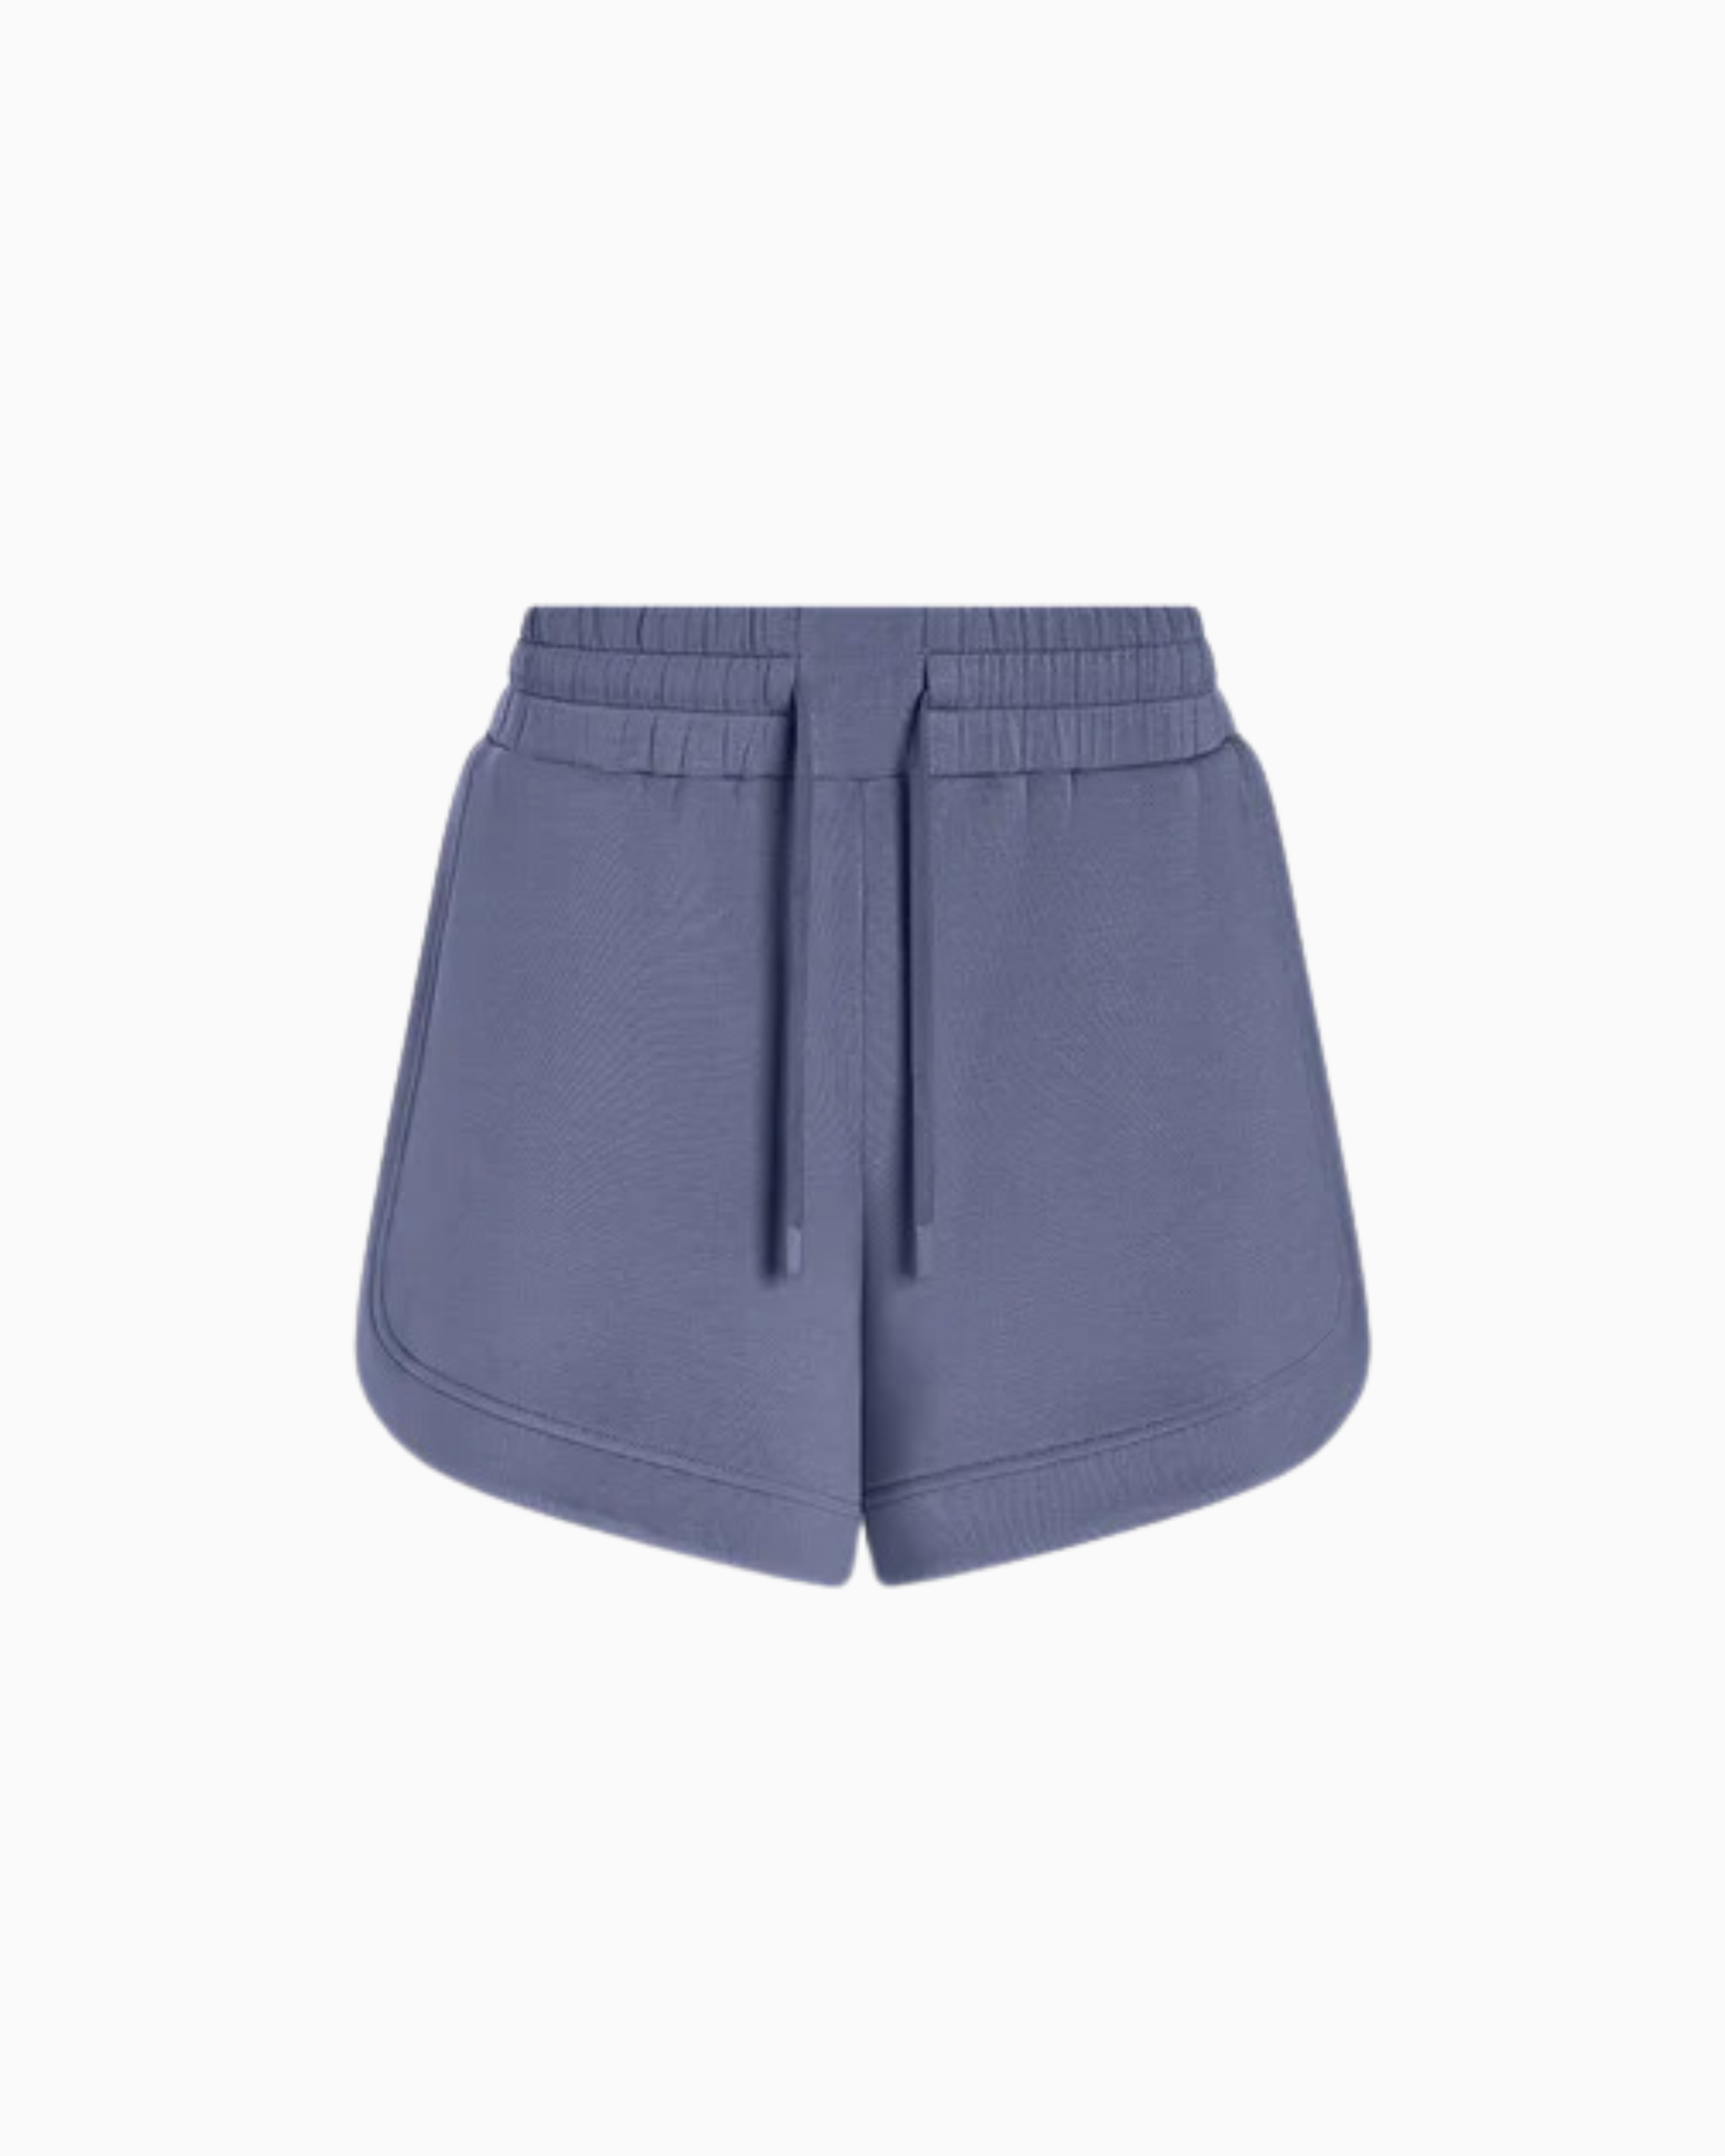 Varley Ollie High Rise Short in Stone Blue